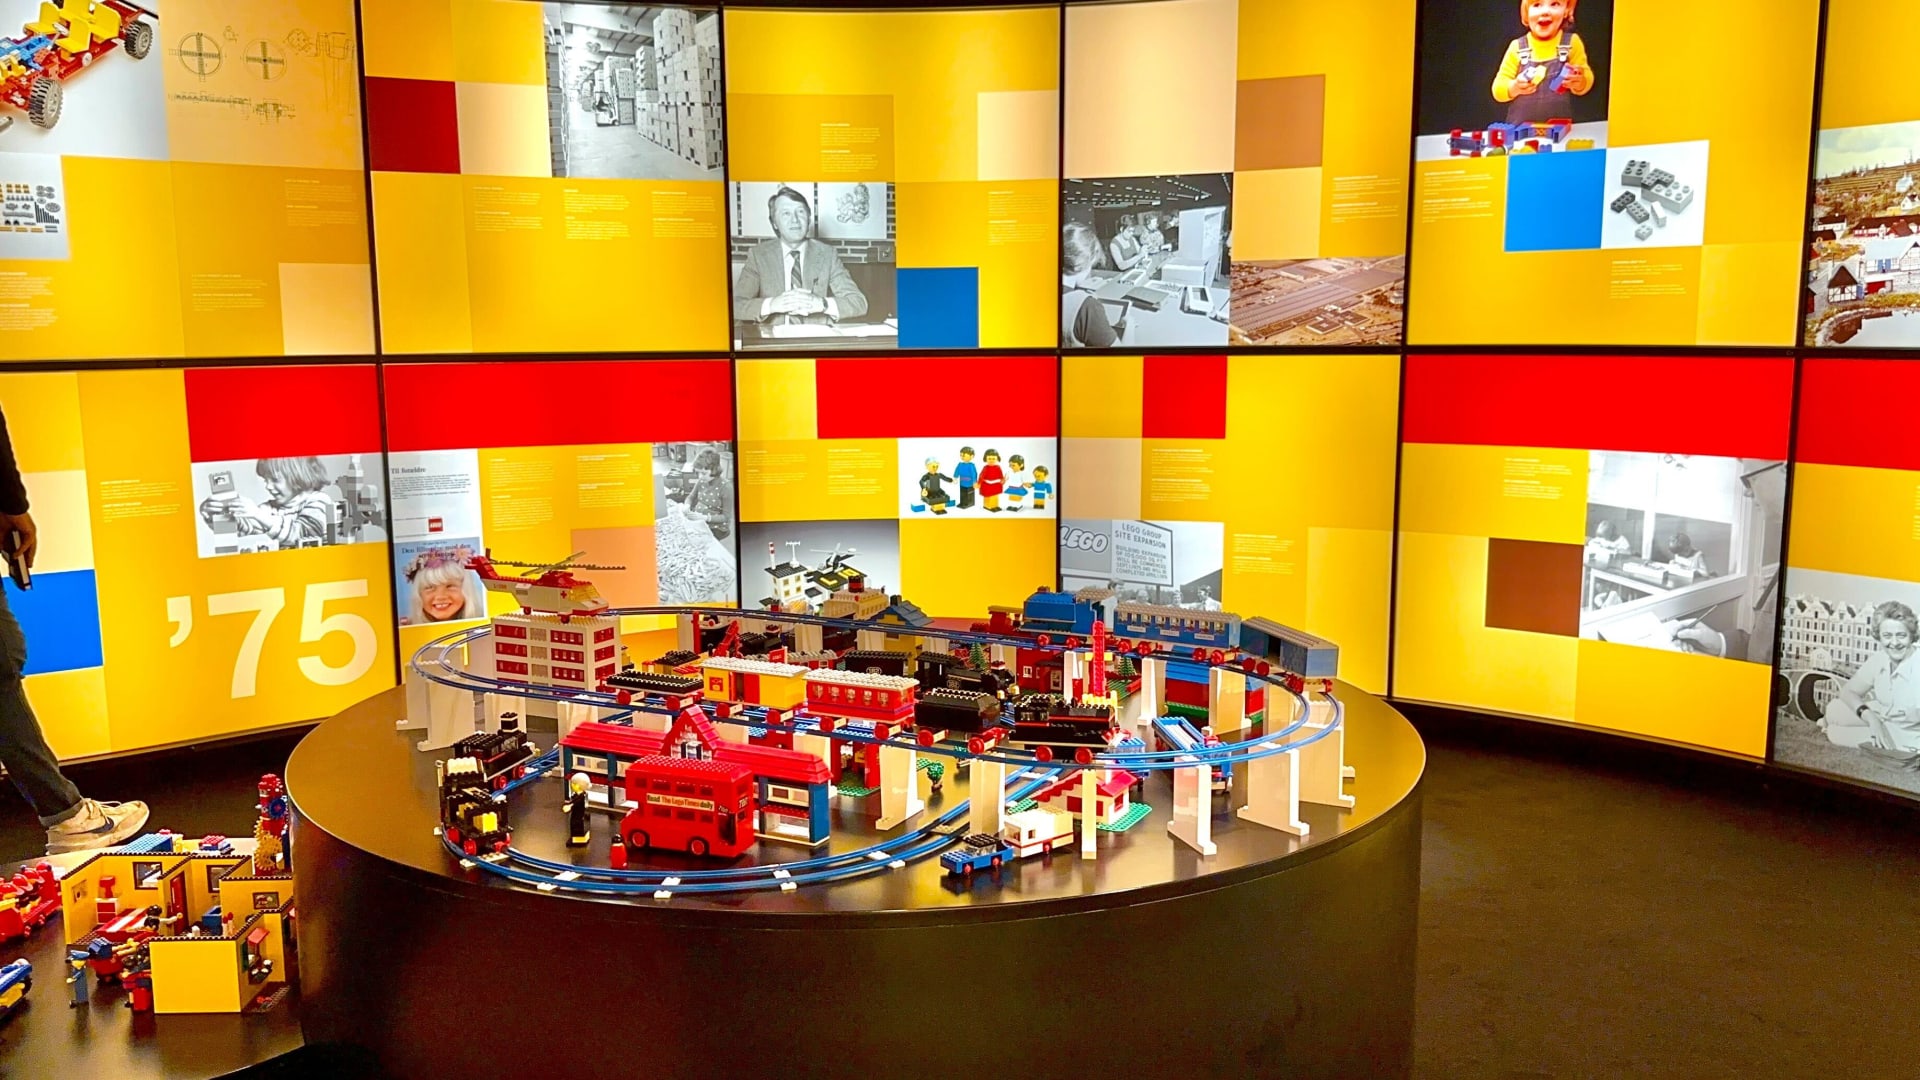 helvede sweater Marco Polo Lego Has a Secret Museum That You Can't Visit. It's the Company's Most  Brilliant Idea | Inc.com